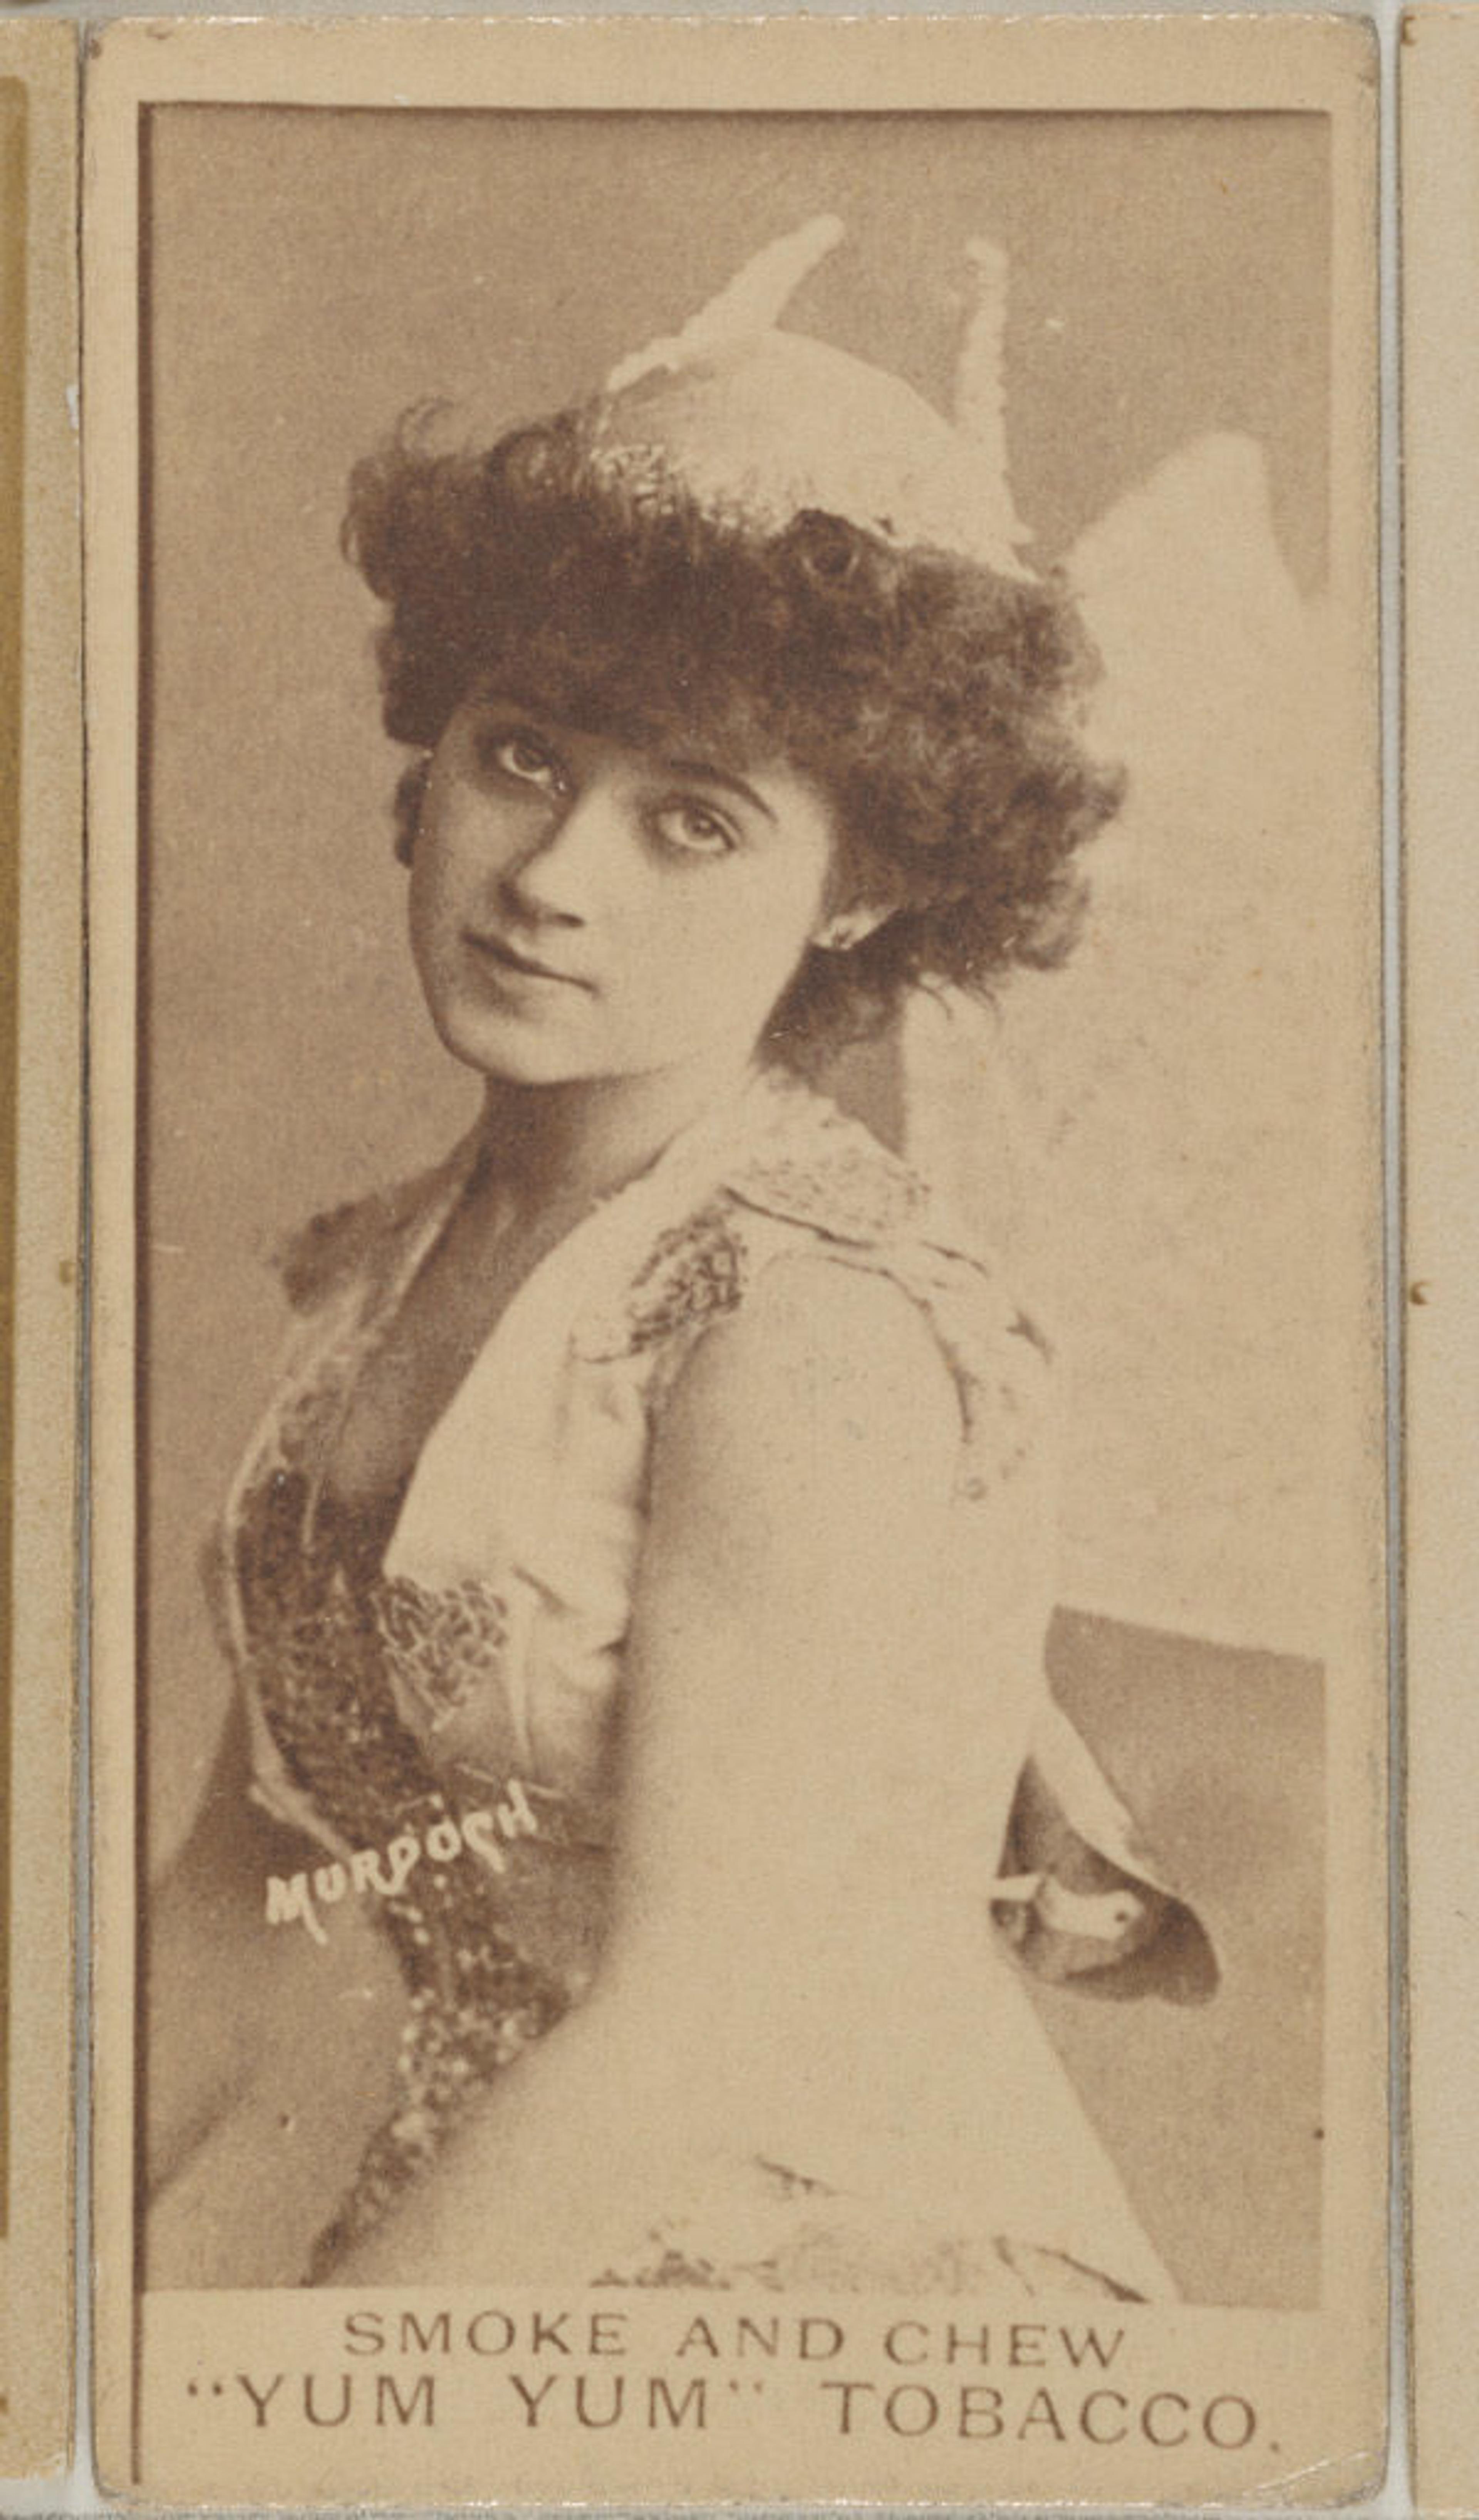 Daisy Murdoch from the Actresses series (N402) issued by August Beck & Co. to promote Yum Yum Tobacco